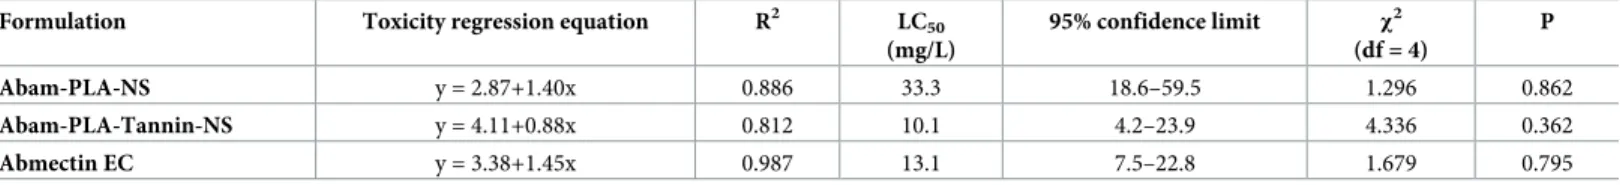 Table 1. Laboratory bioassay results of abamectin formulations against aphids after 48h.